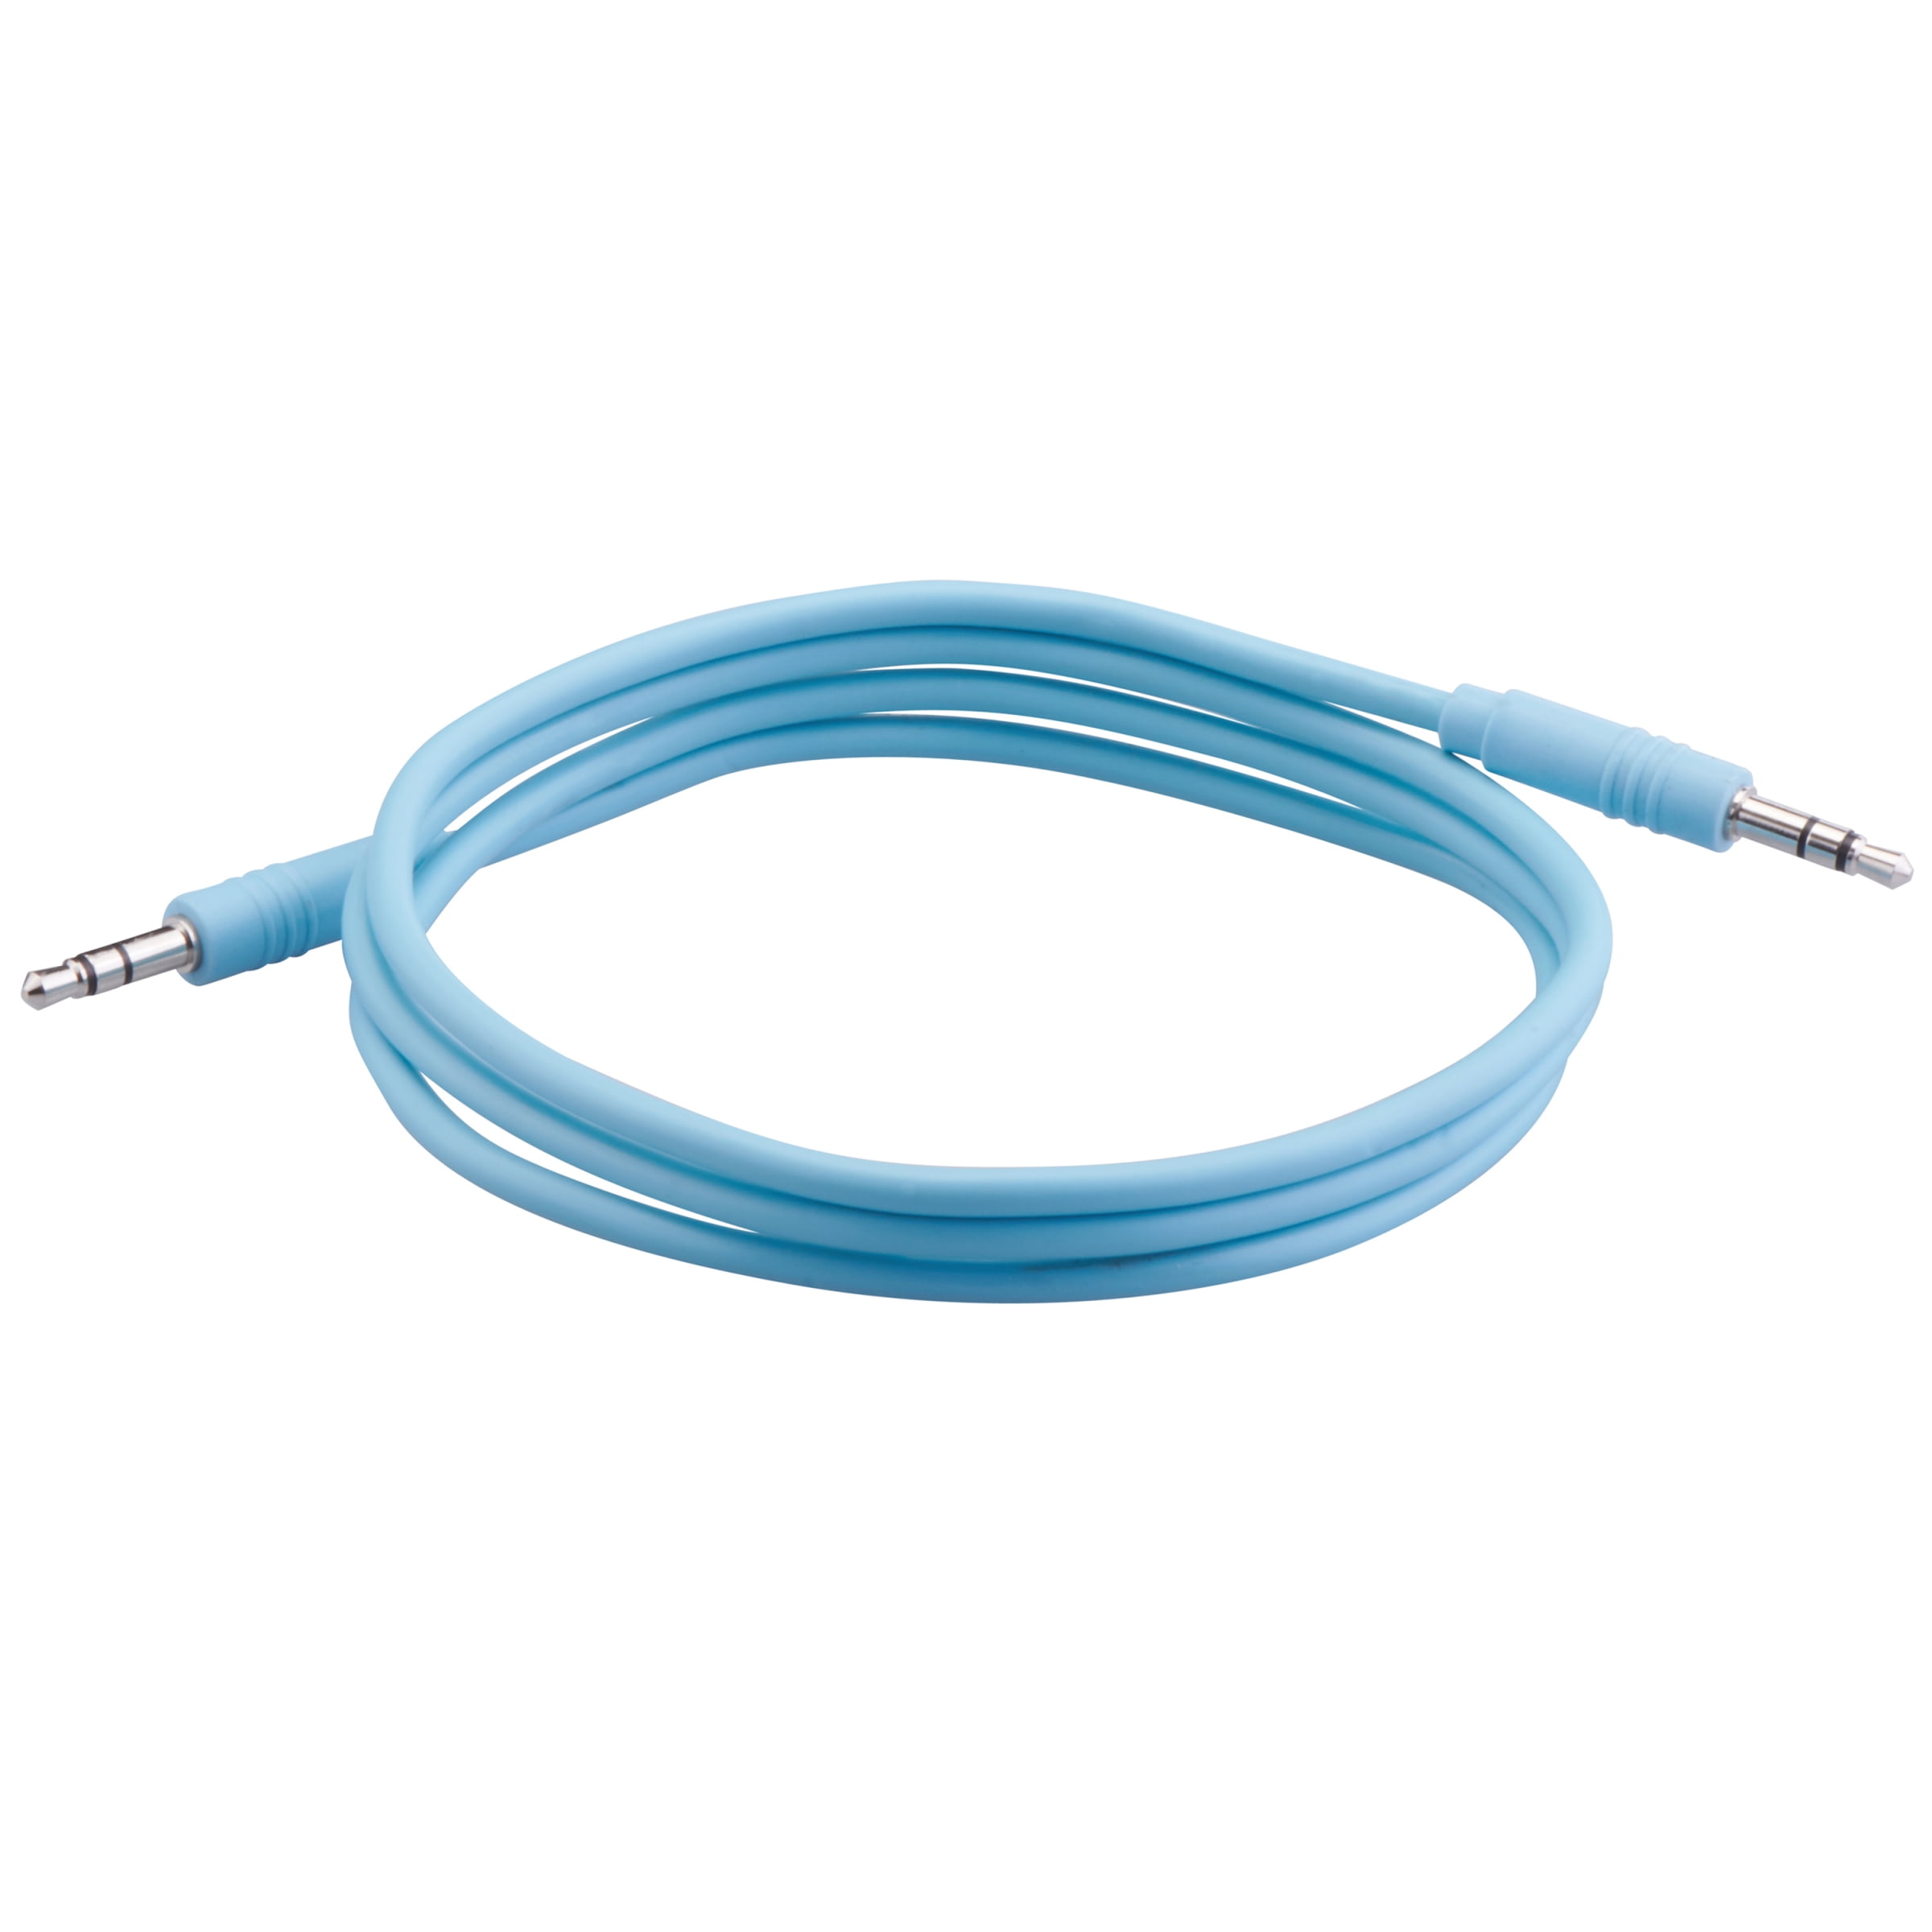 Onn Aux Cable, 3 Foot, Teal 